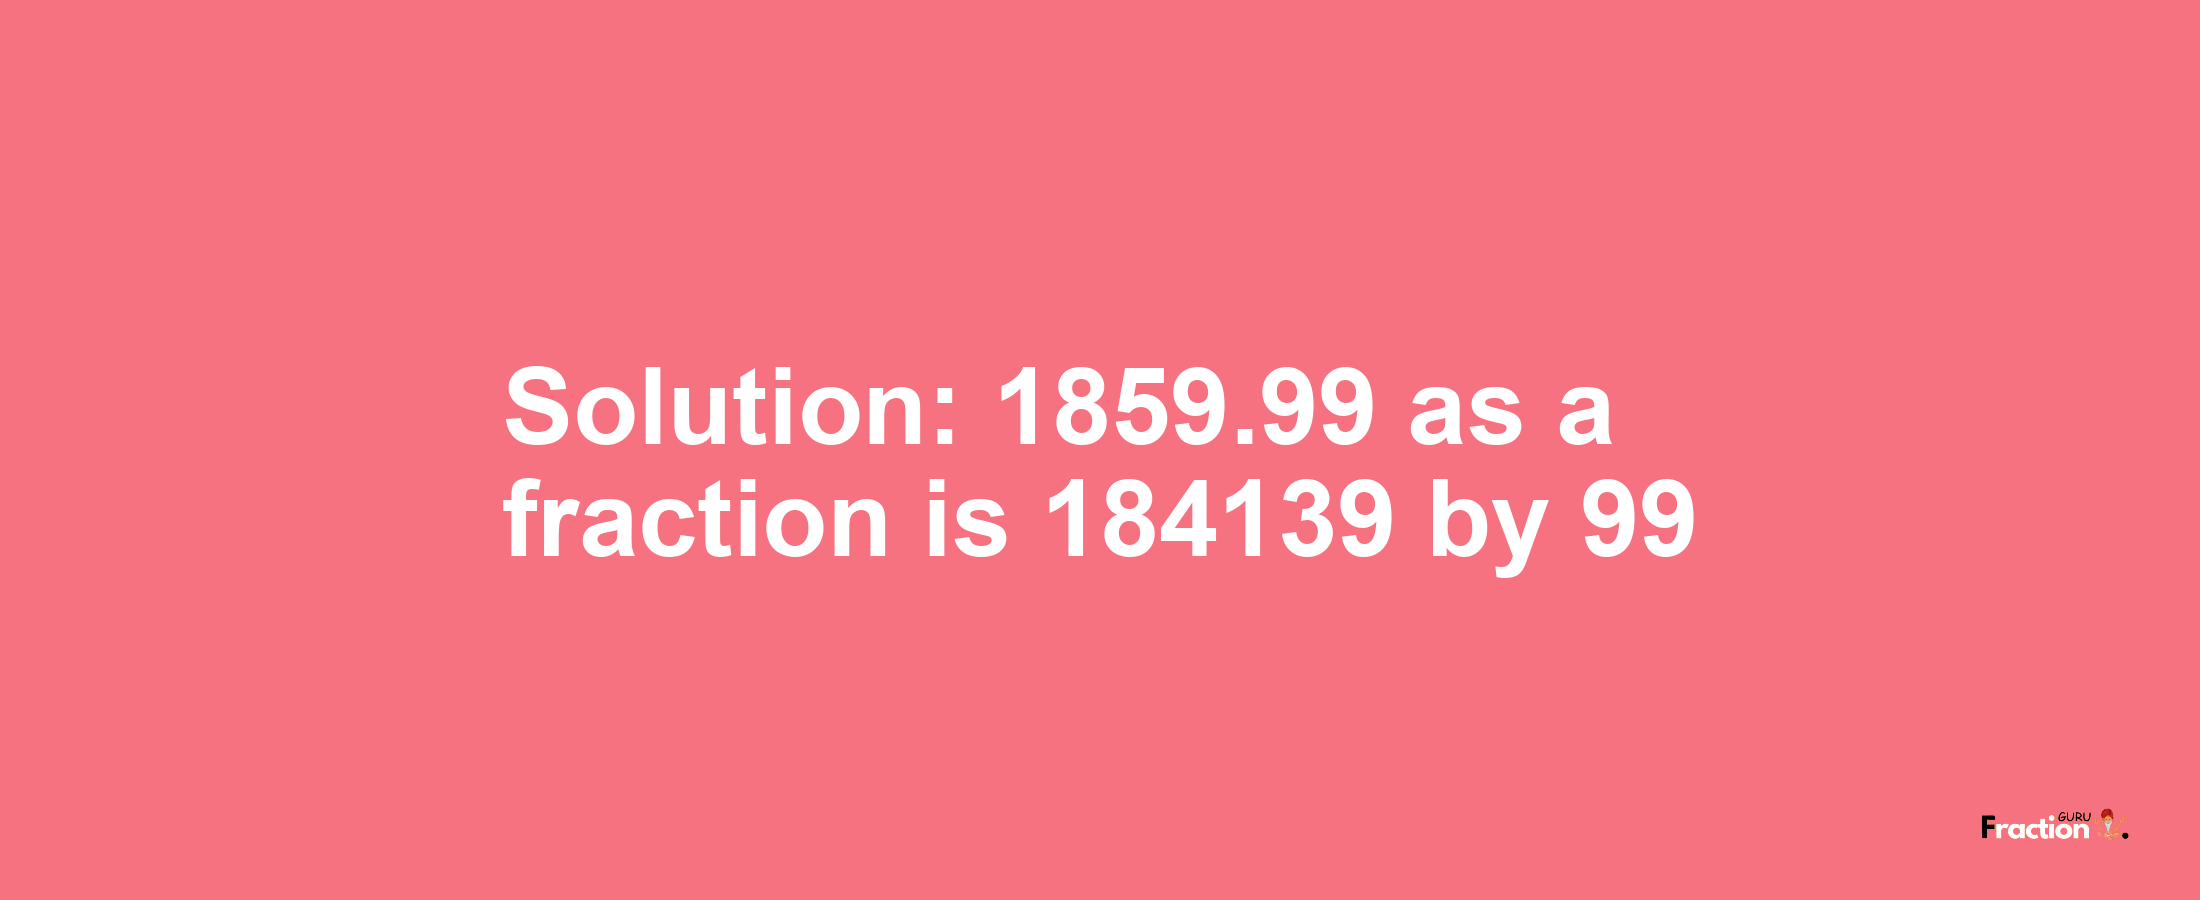 Solution:1859.99 as a fraction is 184139/99